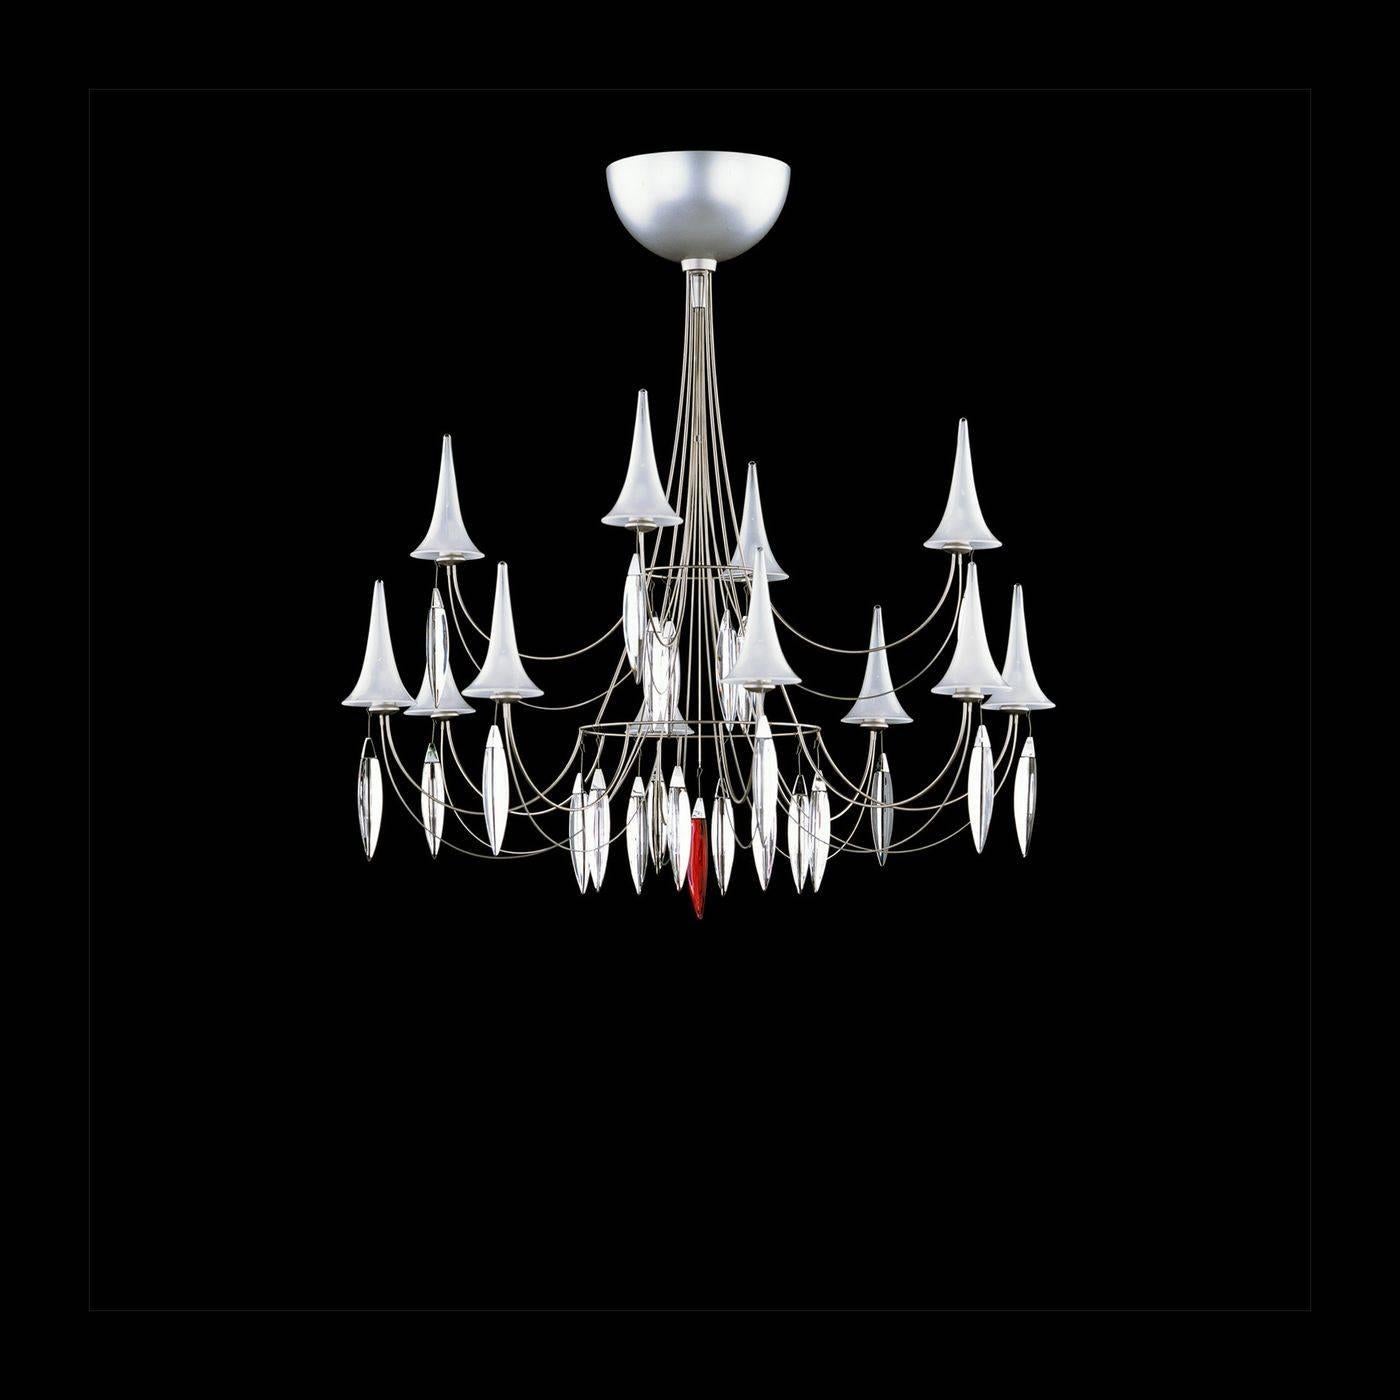 A contemporary and Minimalist work of art by Baccarat, France. Adorned with 23 signed crystal transparent plumes and six onyx ones. One Baccarat signature ruby crystal plume plus. The total is 30 crystal plumes
Lightweight stainless steel